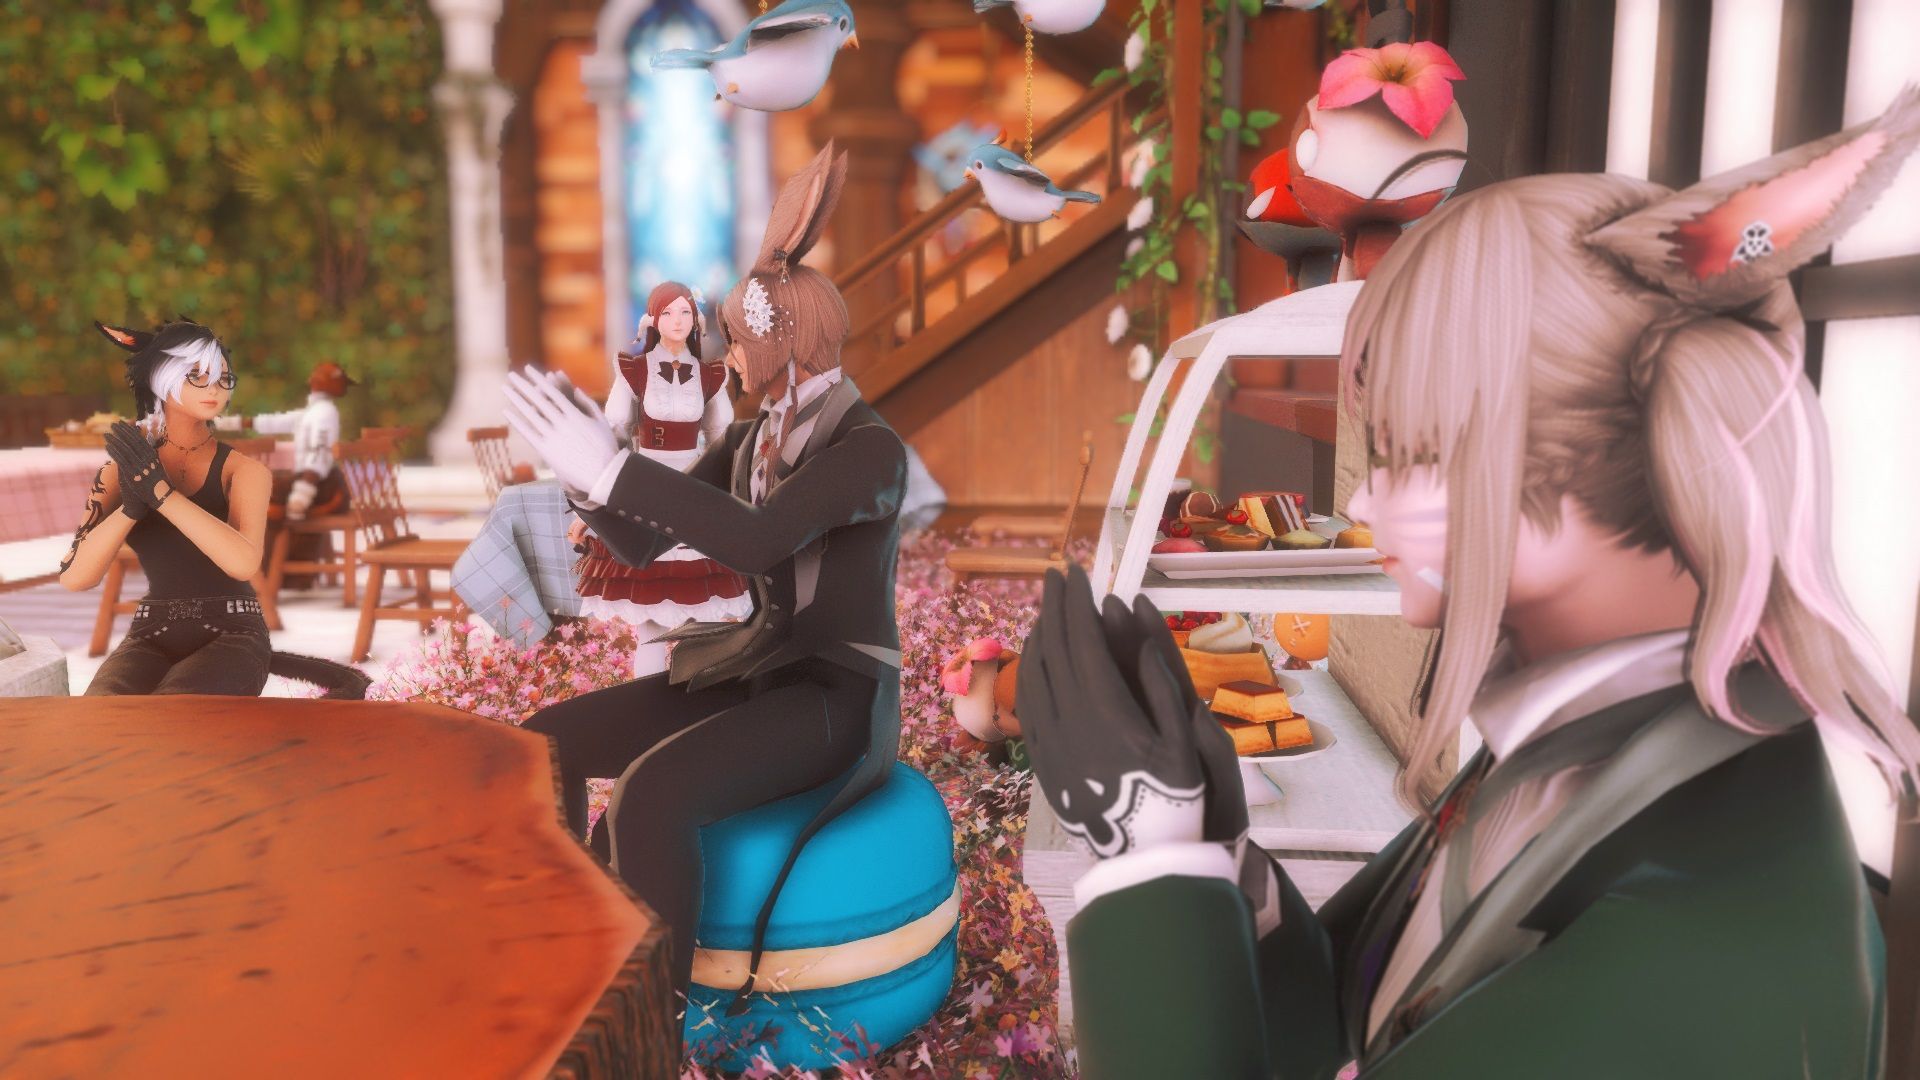 Final Fantasy 14 maids and butlers with customers in the Maid Service cafe